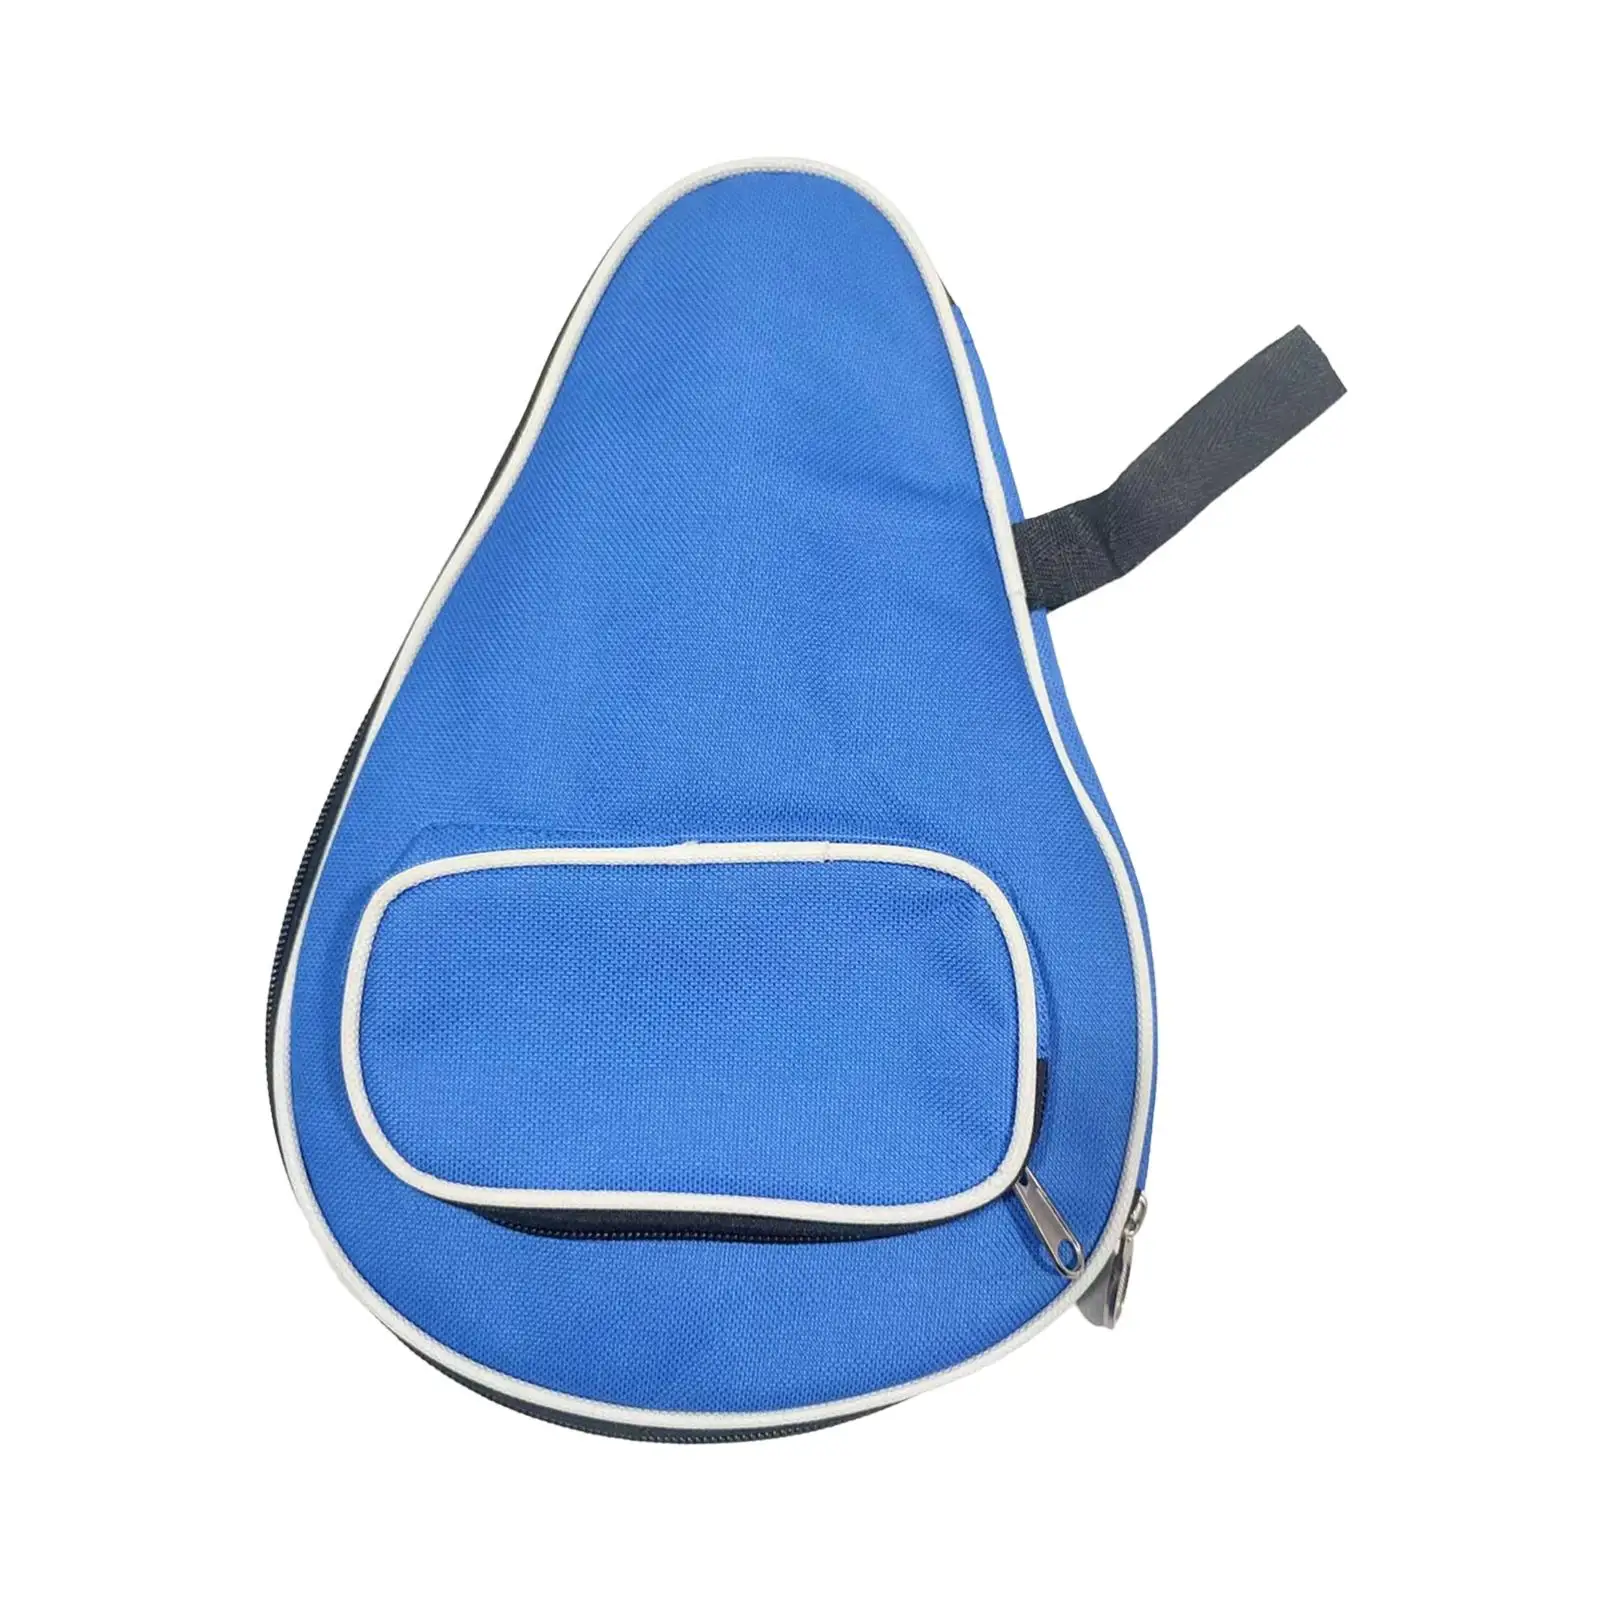 Table Tennis Racket Cover Multifunction Lightweight Table Tennis Paddle Case Racket Pouch for Competition Training Indoor Travel